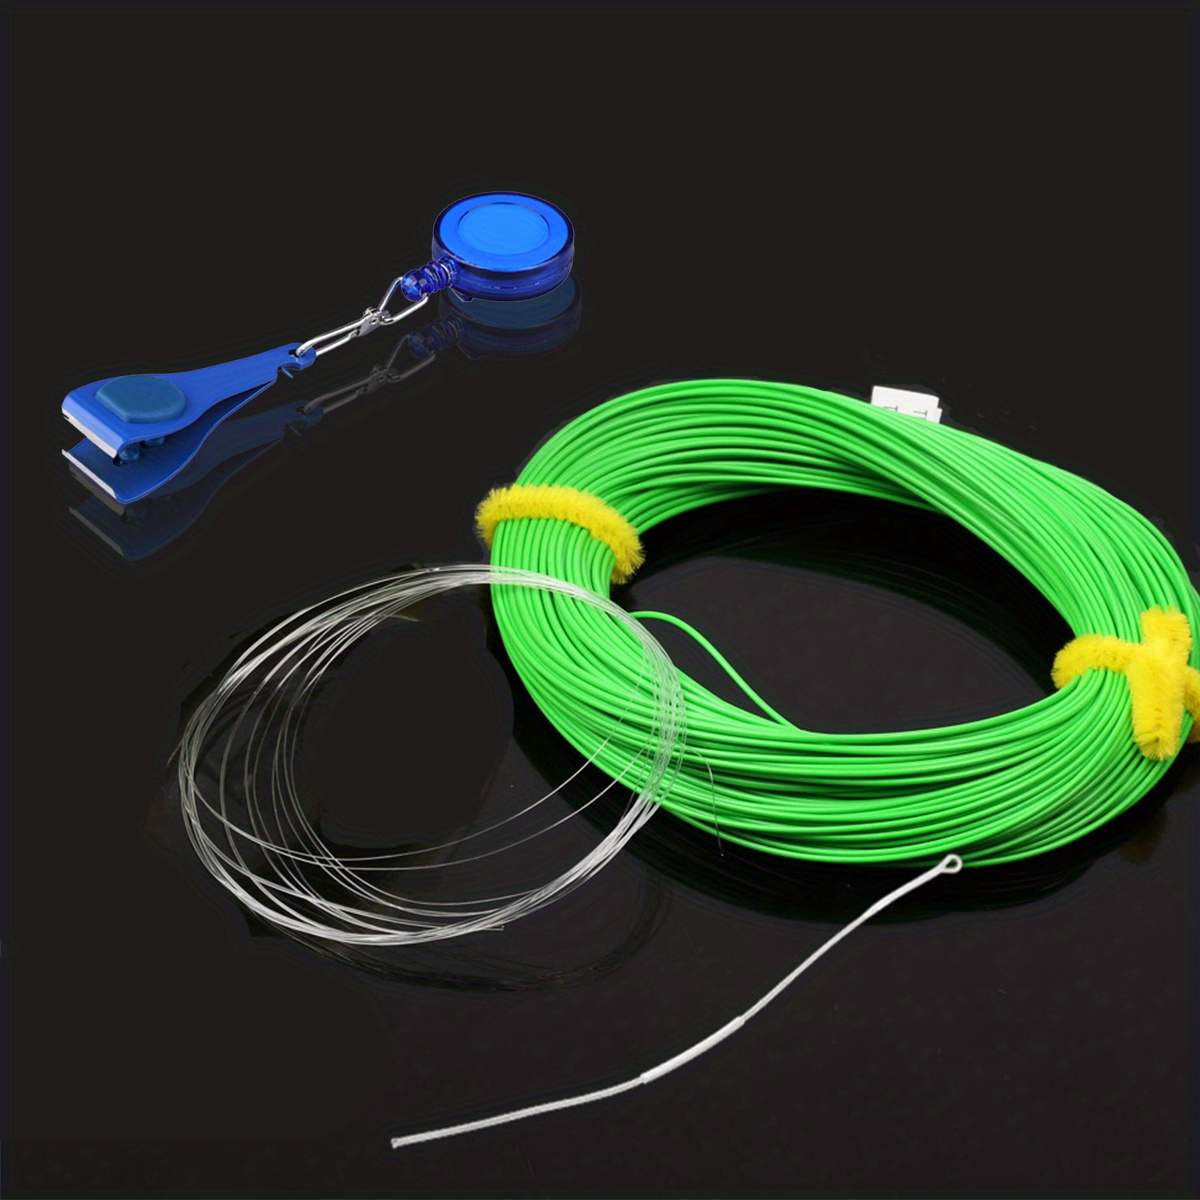 Sougayilang Fly Fishing Line, Main Line Leader Line 6x, Connecting